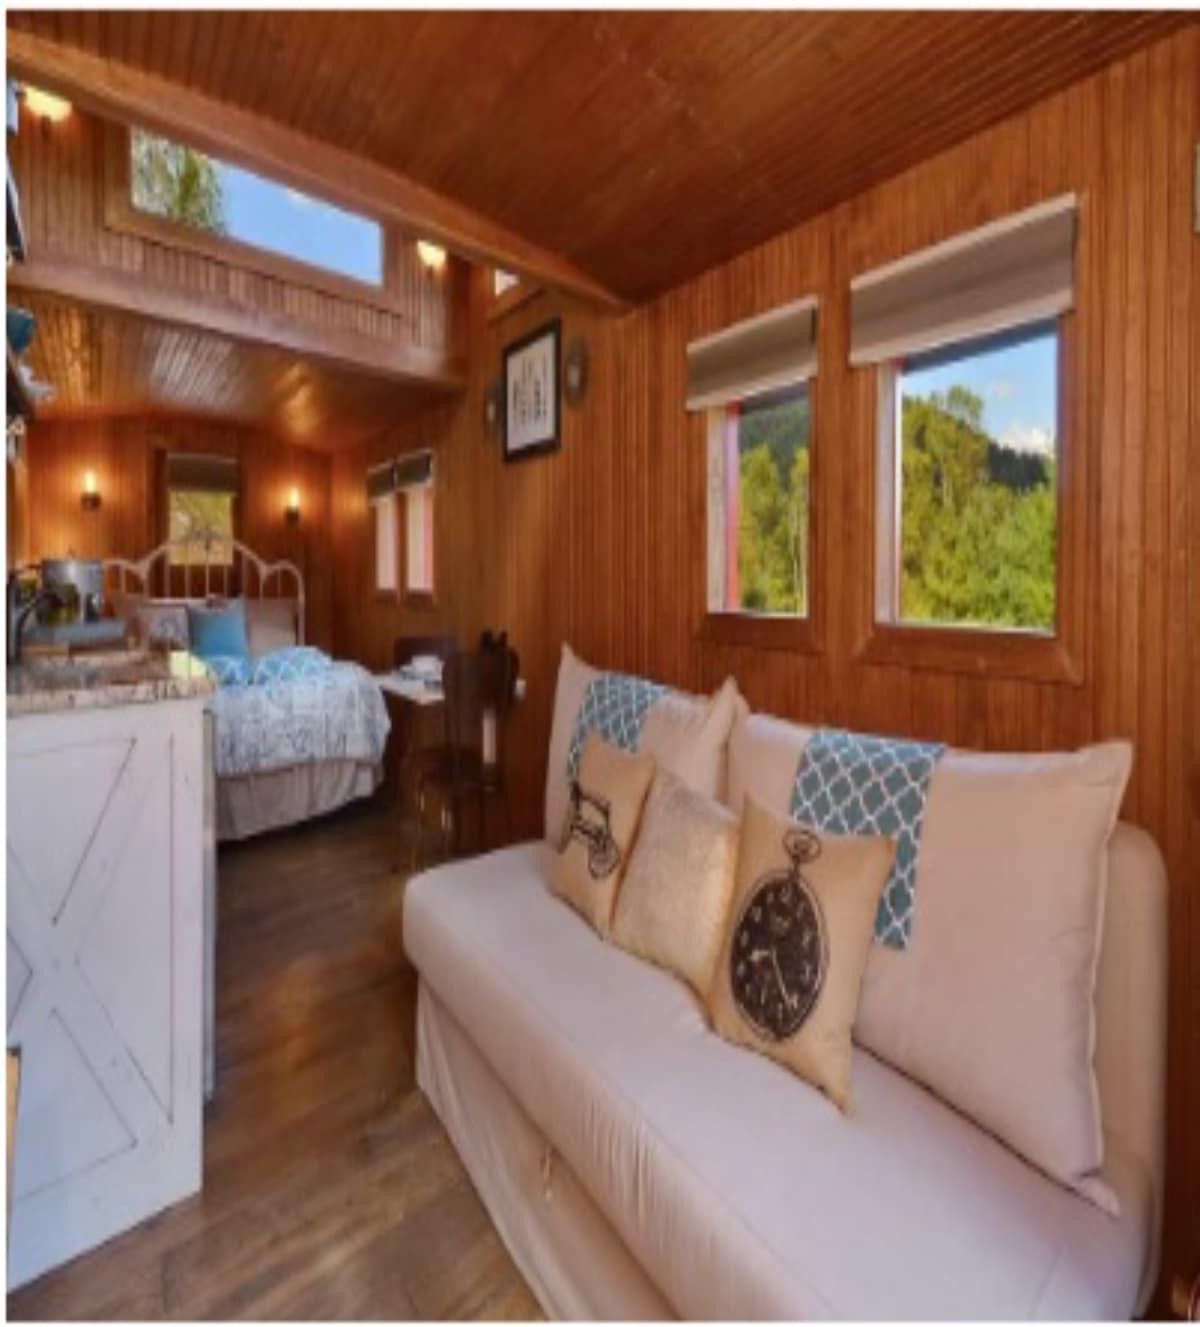 Decorative Cushions (caboose tiny house interior view)